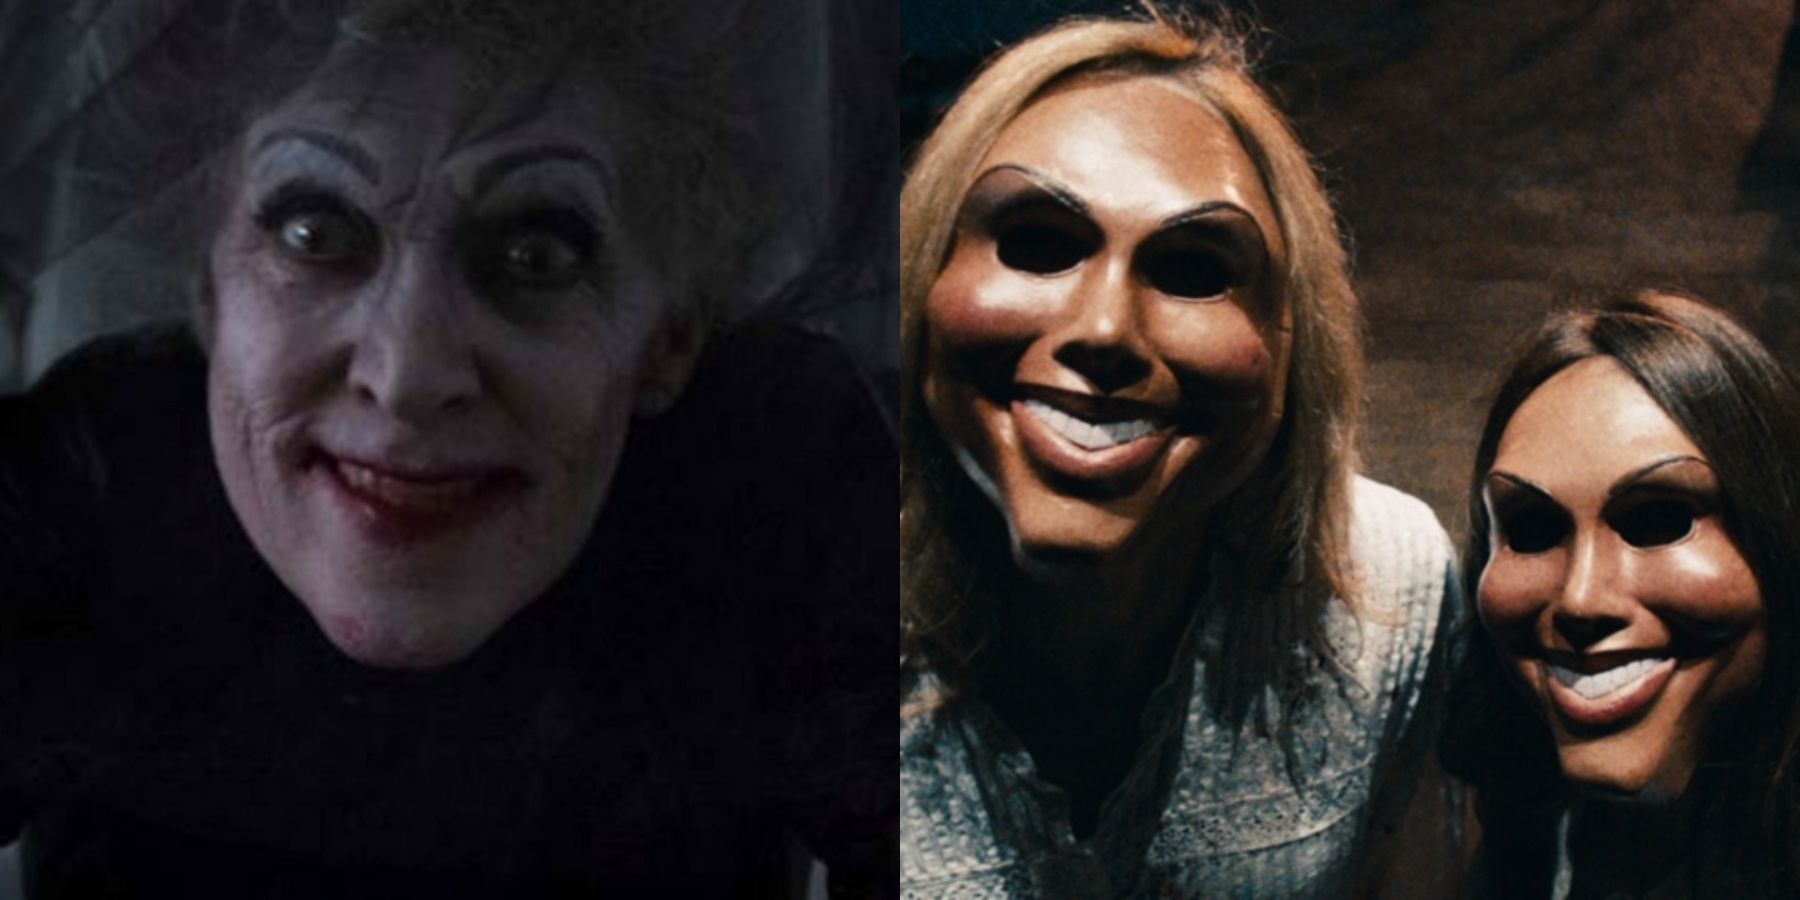 Split image of the demon from Insidious: Chapter 3 and the masks from The Purge